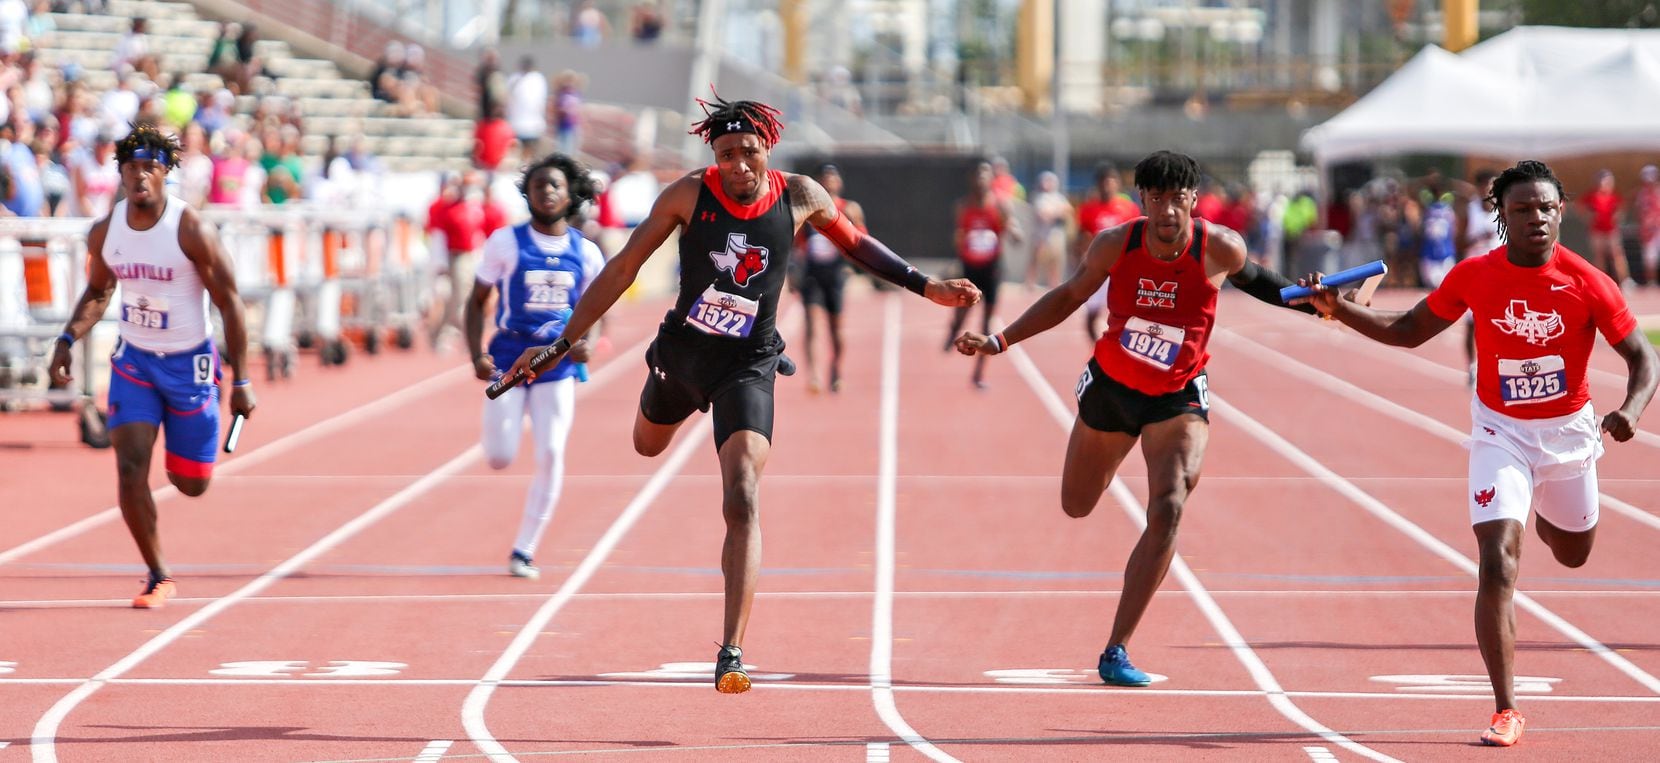 Dacorey Ware of Cedar Hill crosses the finish line in first place the 6A Boys 4x100 meter relay during the UIL state track meet at the Mike A. Myers Stadium, at the University of Texas on May 8, 2021 in Austin, Texas.